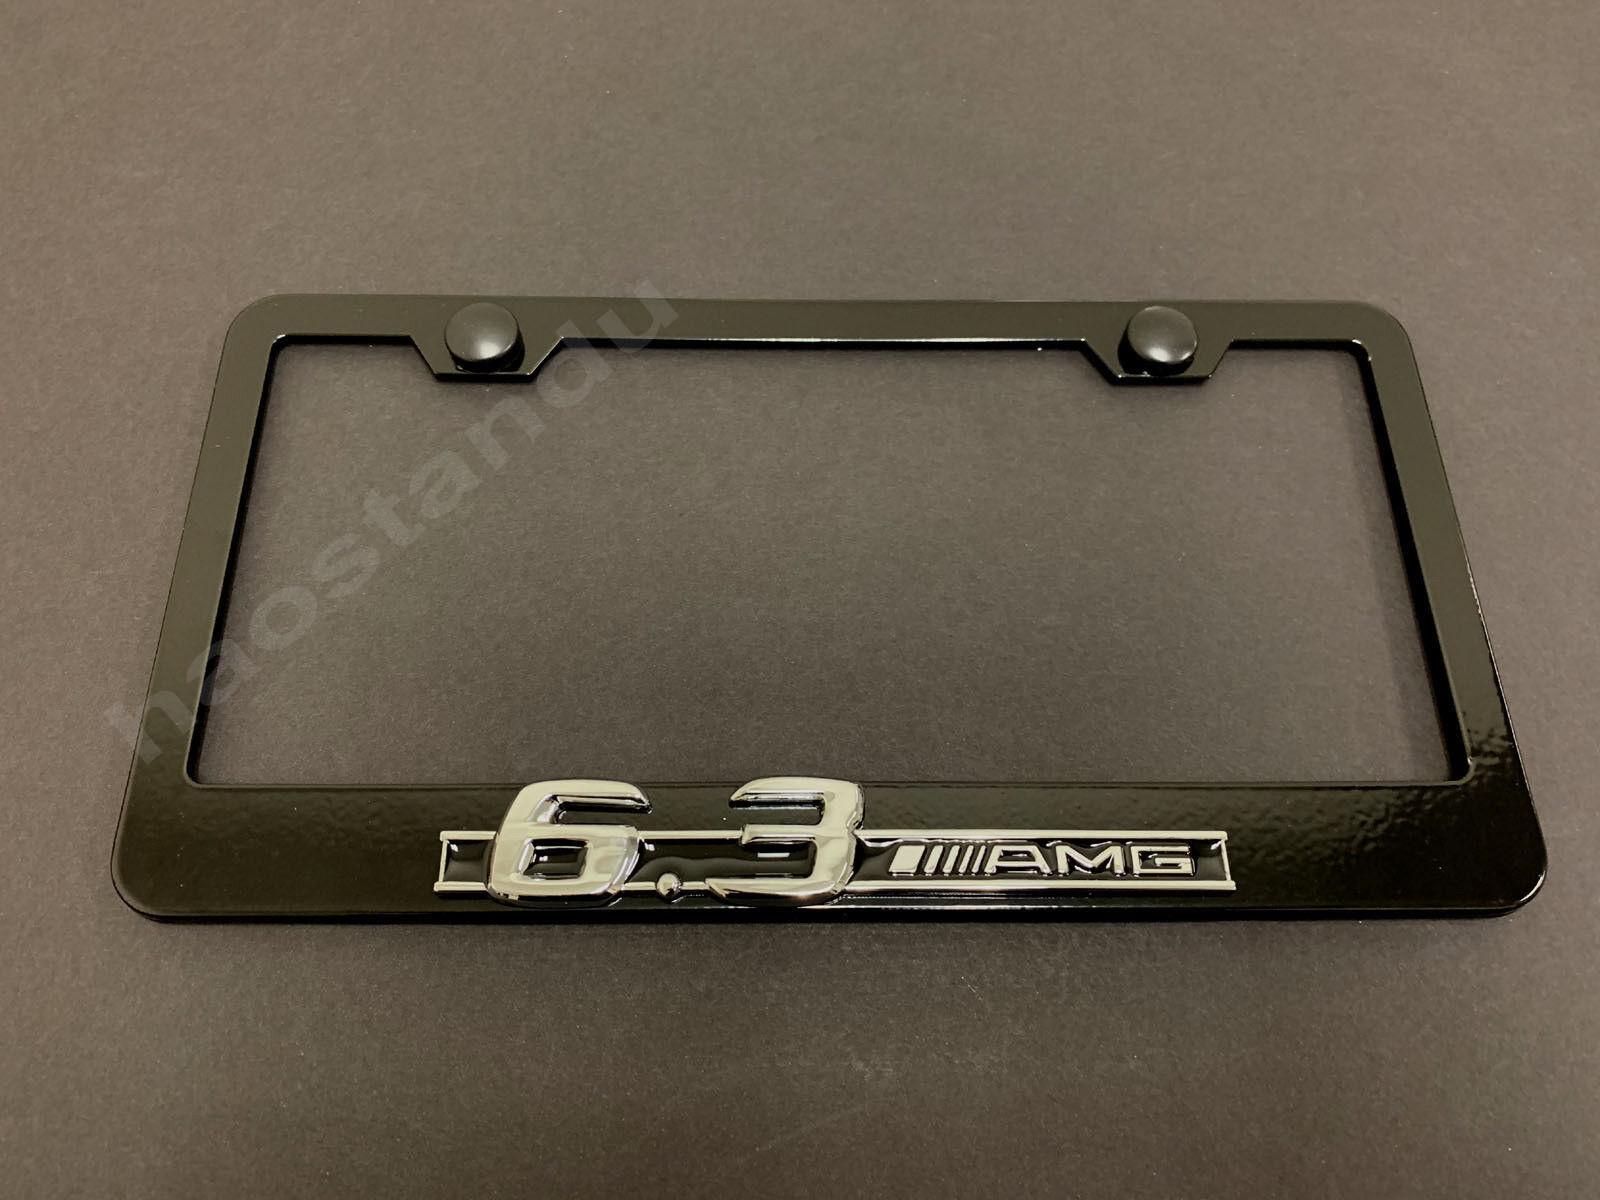 1x 6.3AMG 3D Emblem BLACK Stainless License Plate Frame RUST FREE + S.Cap